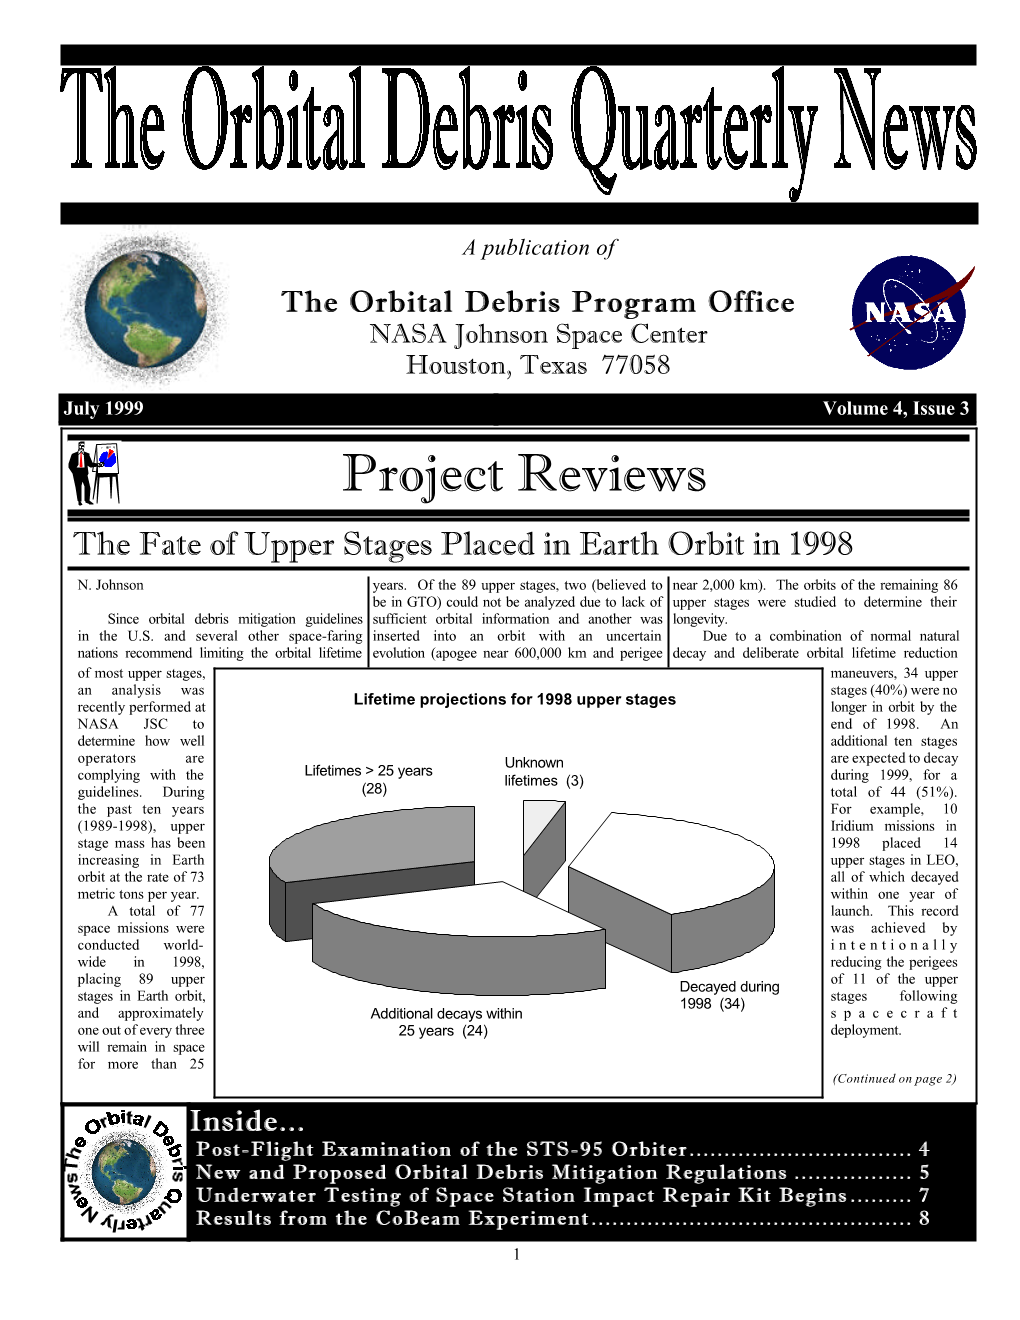 Project Reviews the Fate of Upper Stages Placed in Earth Orbit in 1998